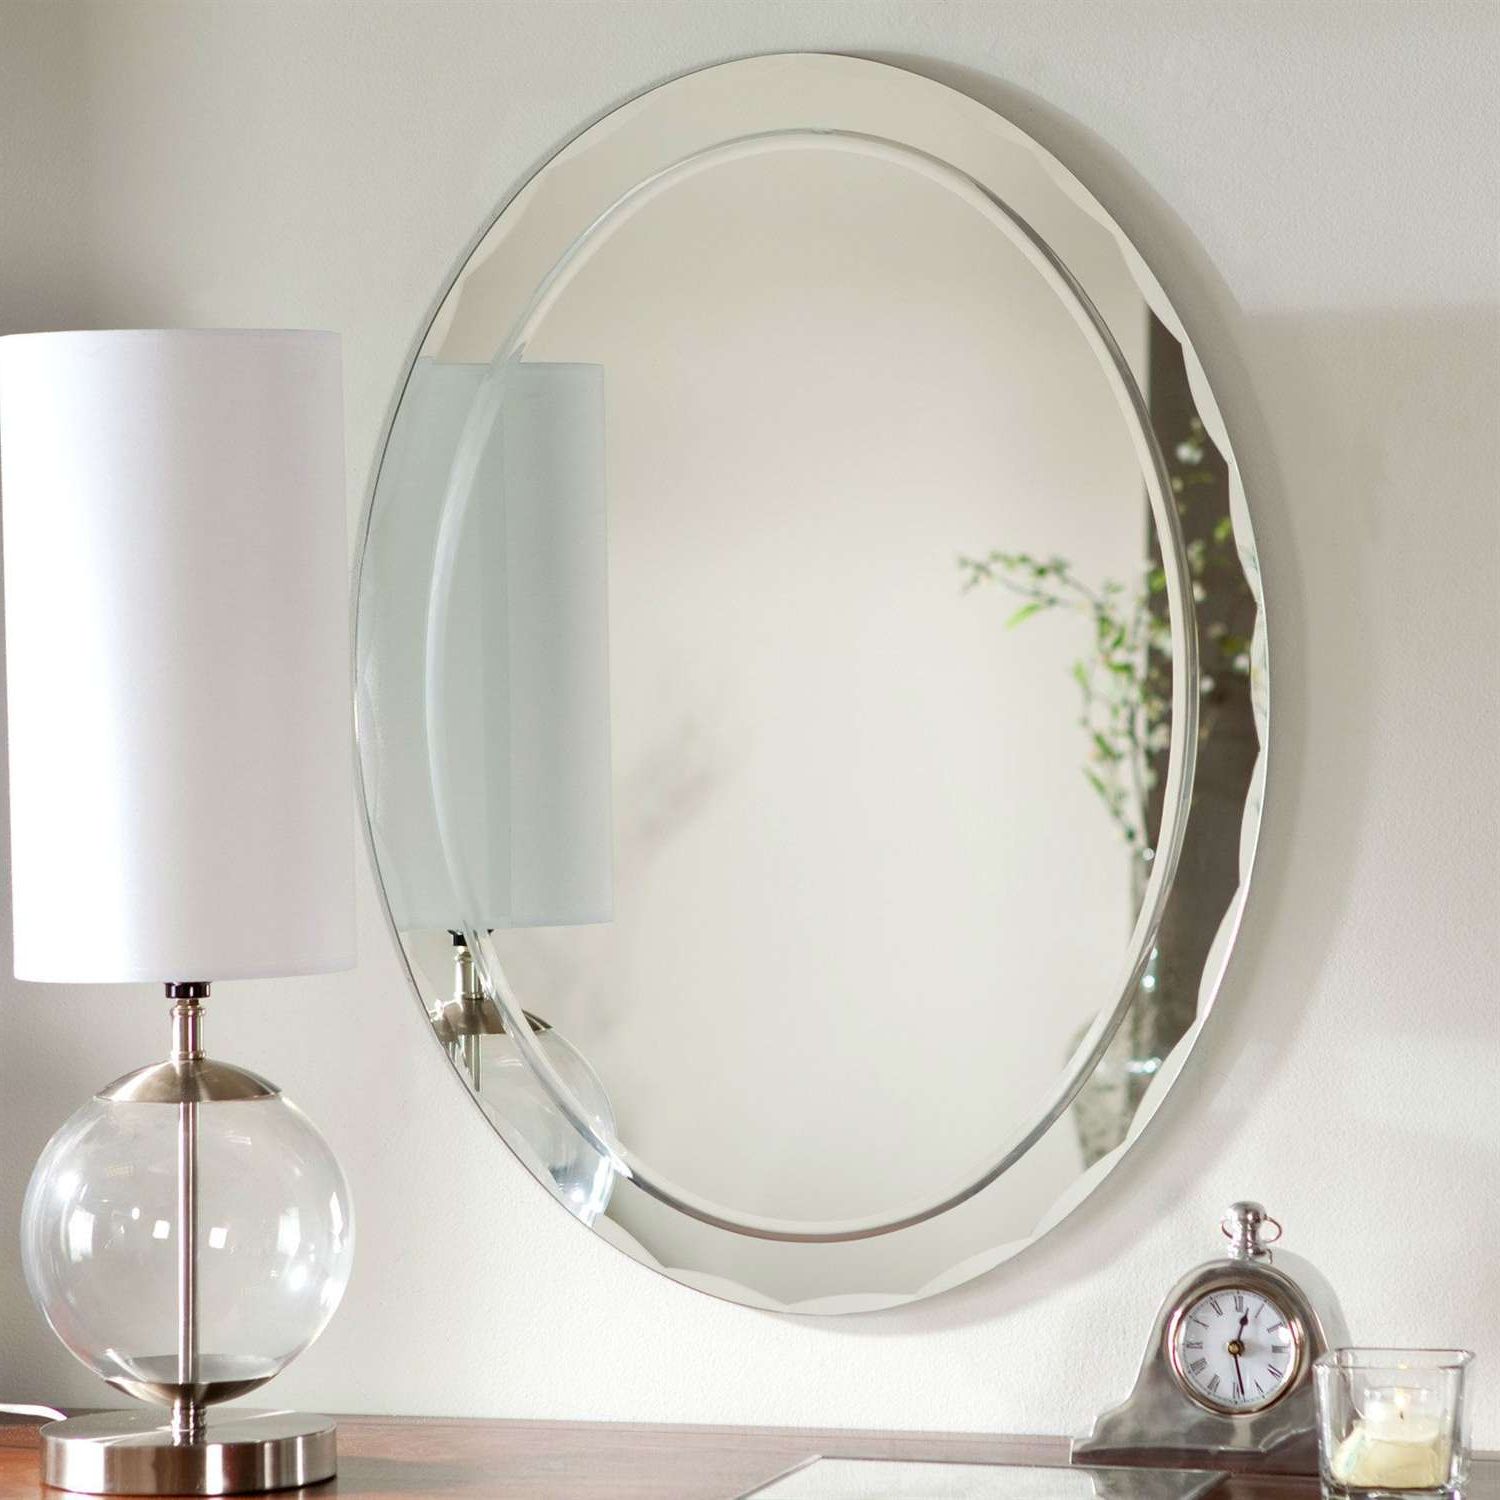 Preferred Oval Frameless Bathroom Vanity Wall Mirror With Beveled Edge Scallop Throughout Oval Frameless Led Wall Mirrors (View 2 of 15)